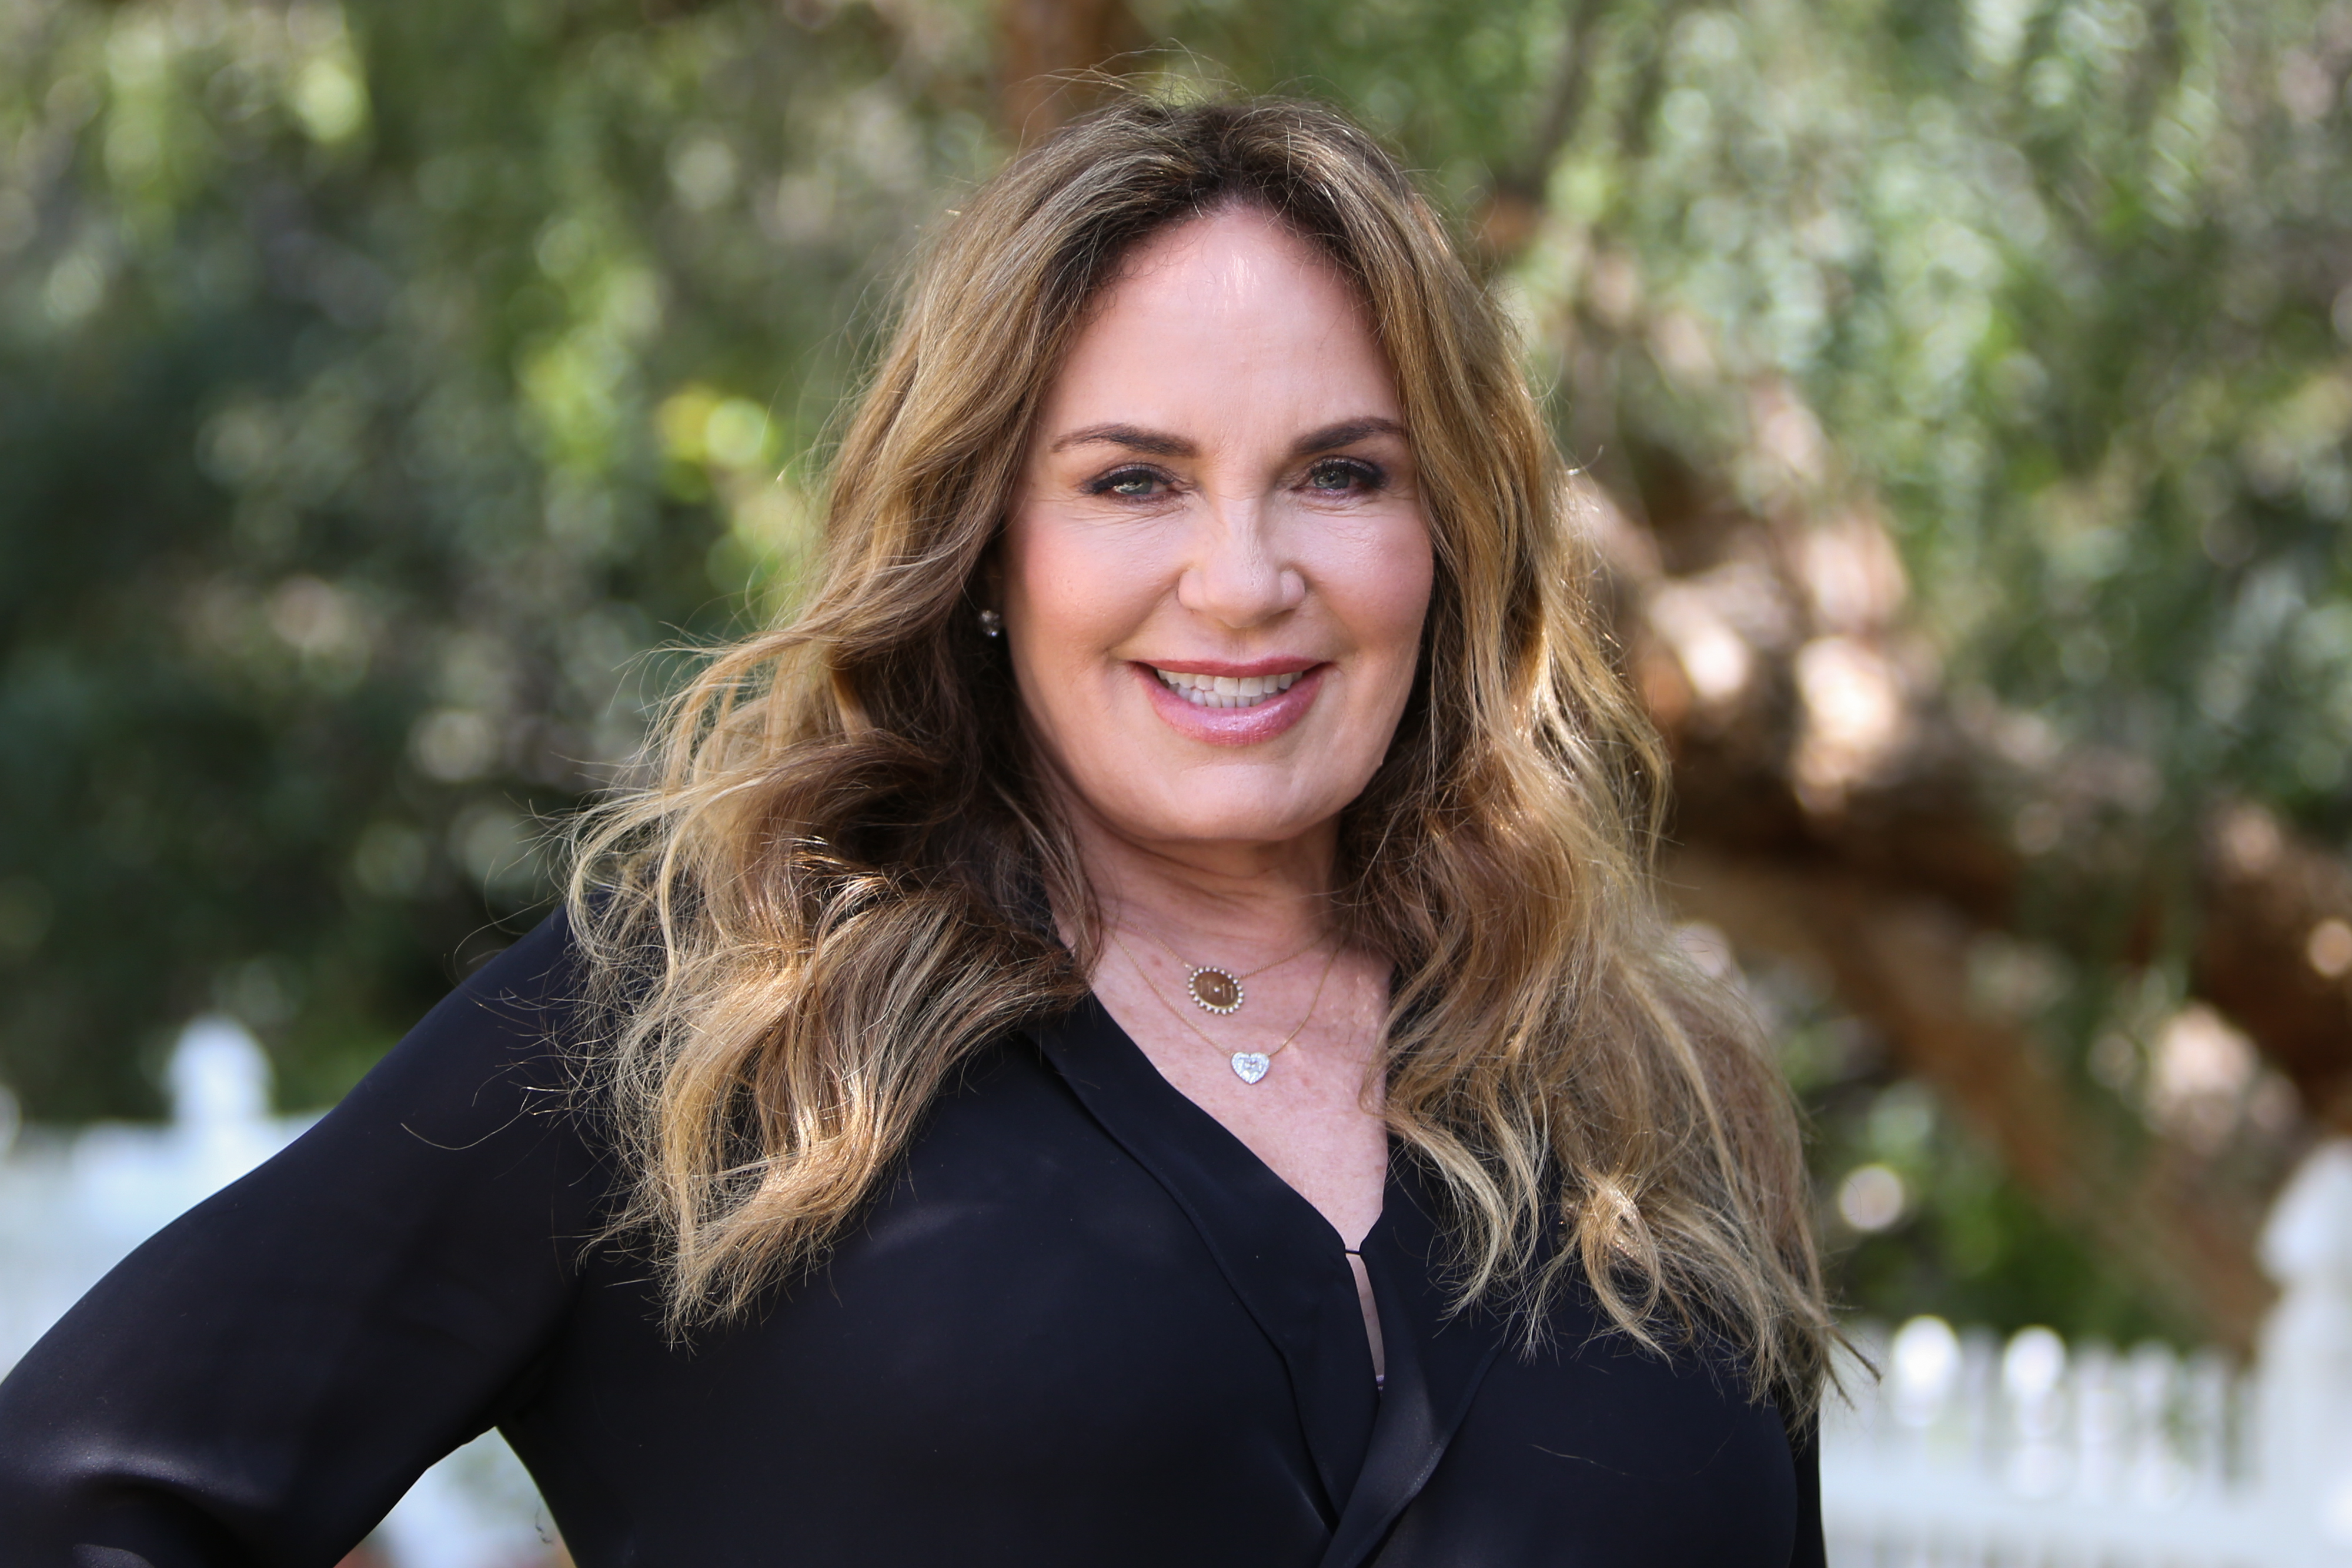 Actress Catherine Bach visits Hallmark's "Home & Family" at Universal Studios Hollywood on March 22, 2019 in Universal City, California. | Source: Getty Images